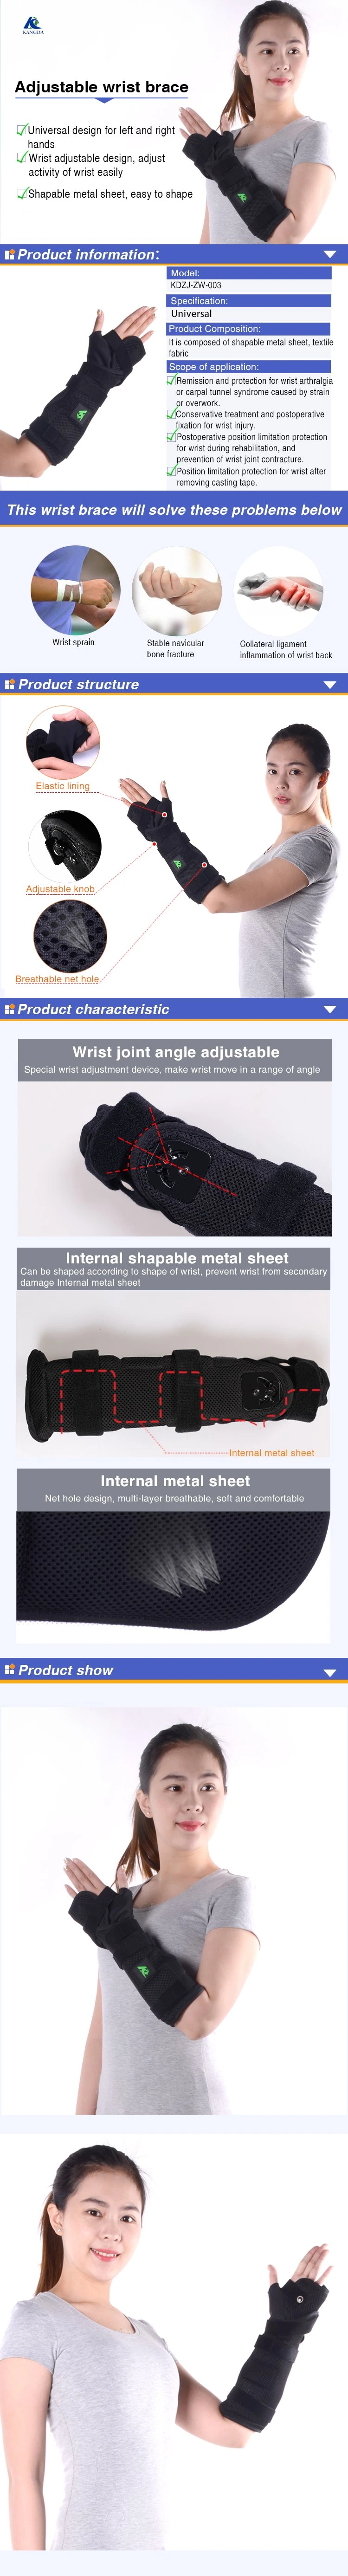 Best for Carpal Tunnel Wrist Brace Wrist Splint for Wrist Support with Stabilizer for Treatment